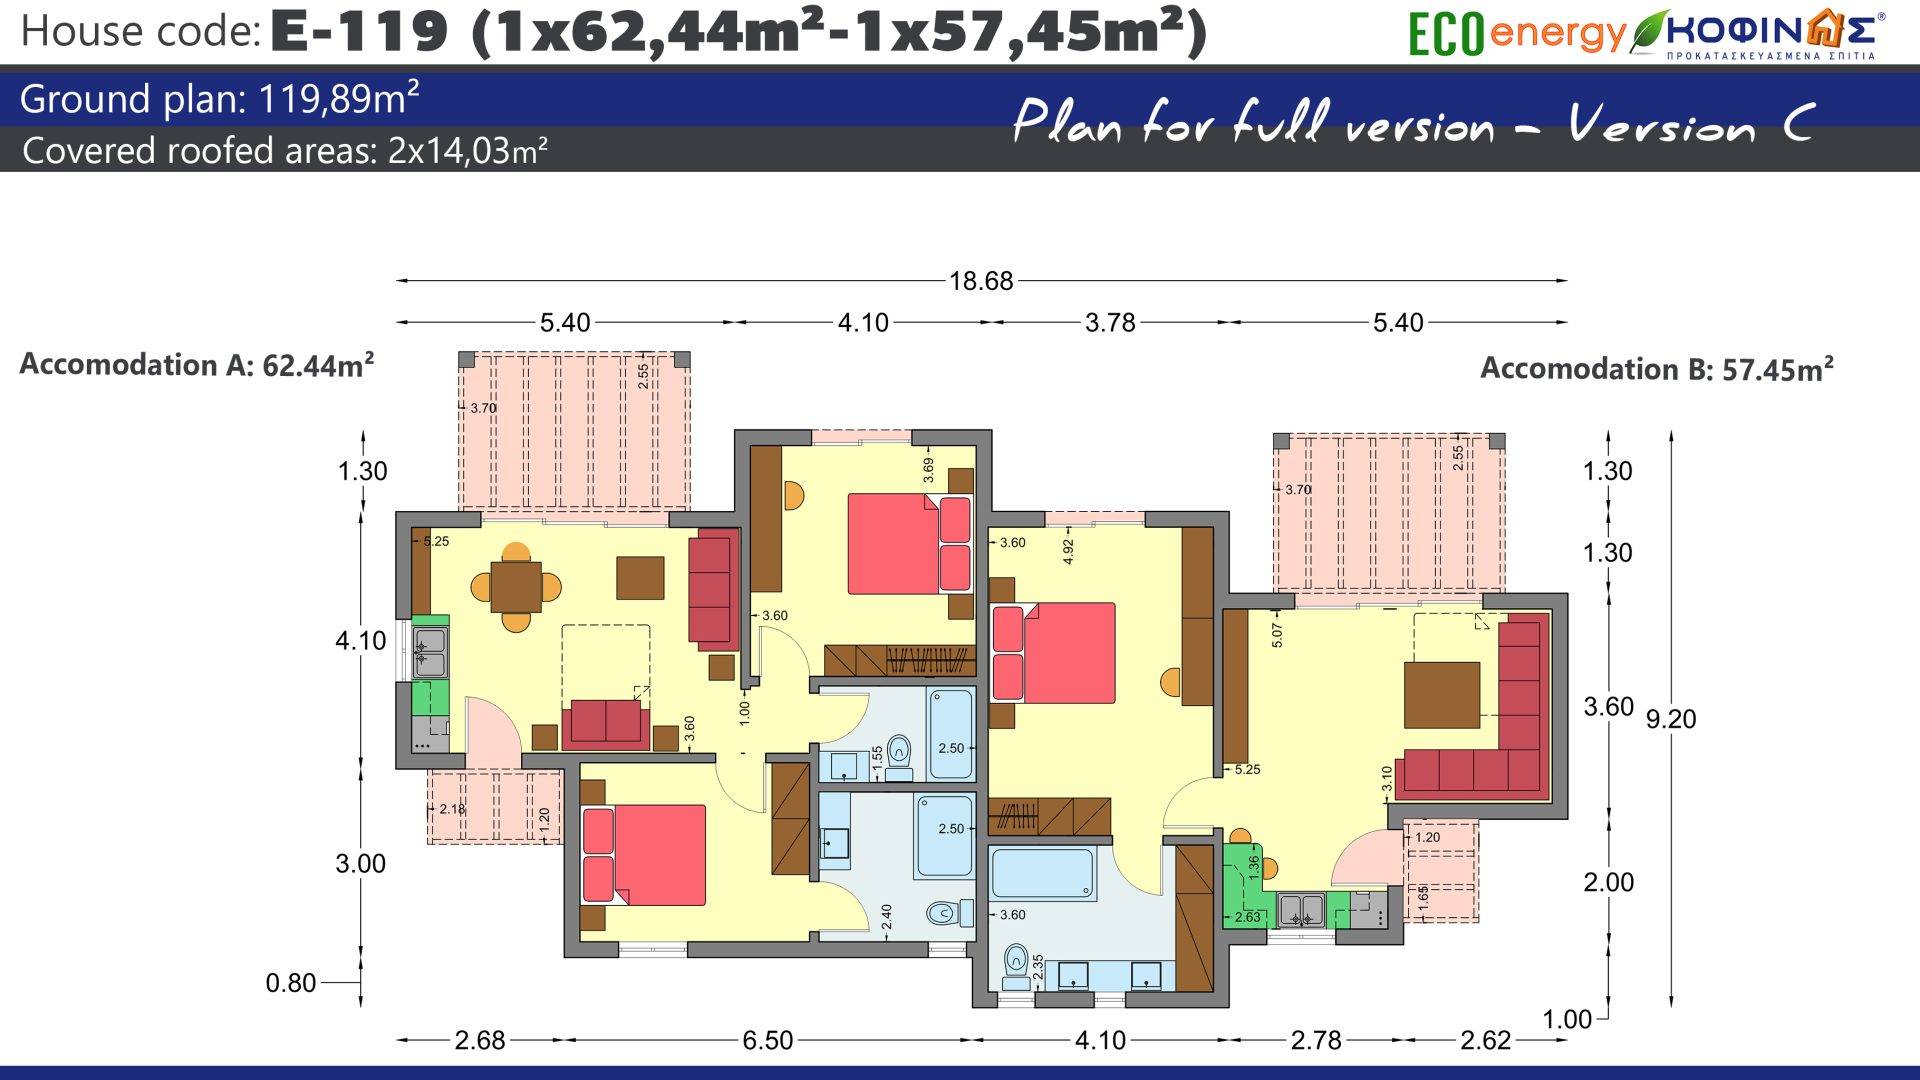 1 Storey Complex E-119, total surface of 1 x 62.44 and 1 x 57.45= 119,89 m² (version A+C) and 2 x 63.58 = 127.16 m²(version B) , covered roofed areas 14,03 m²(version A+C) and 14.67 m² (Version B)